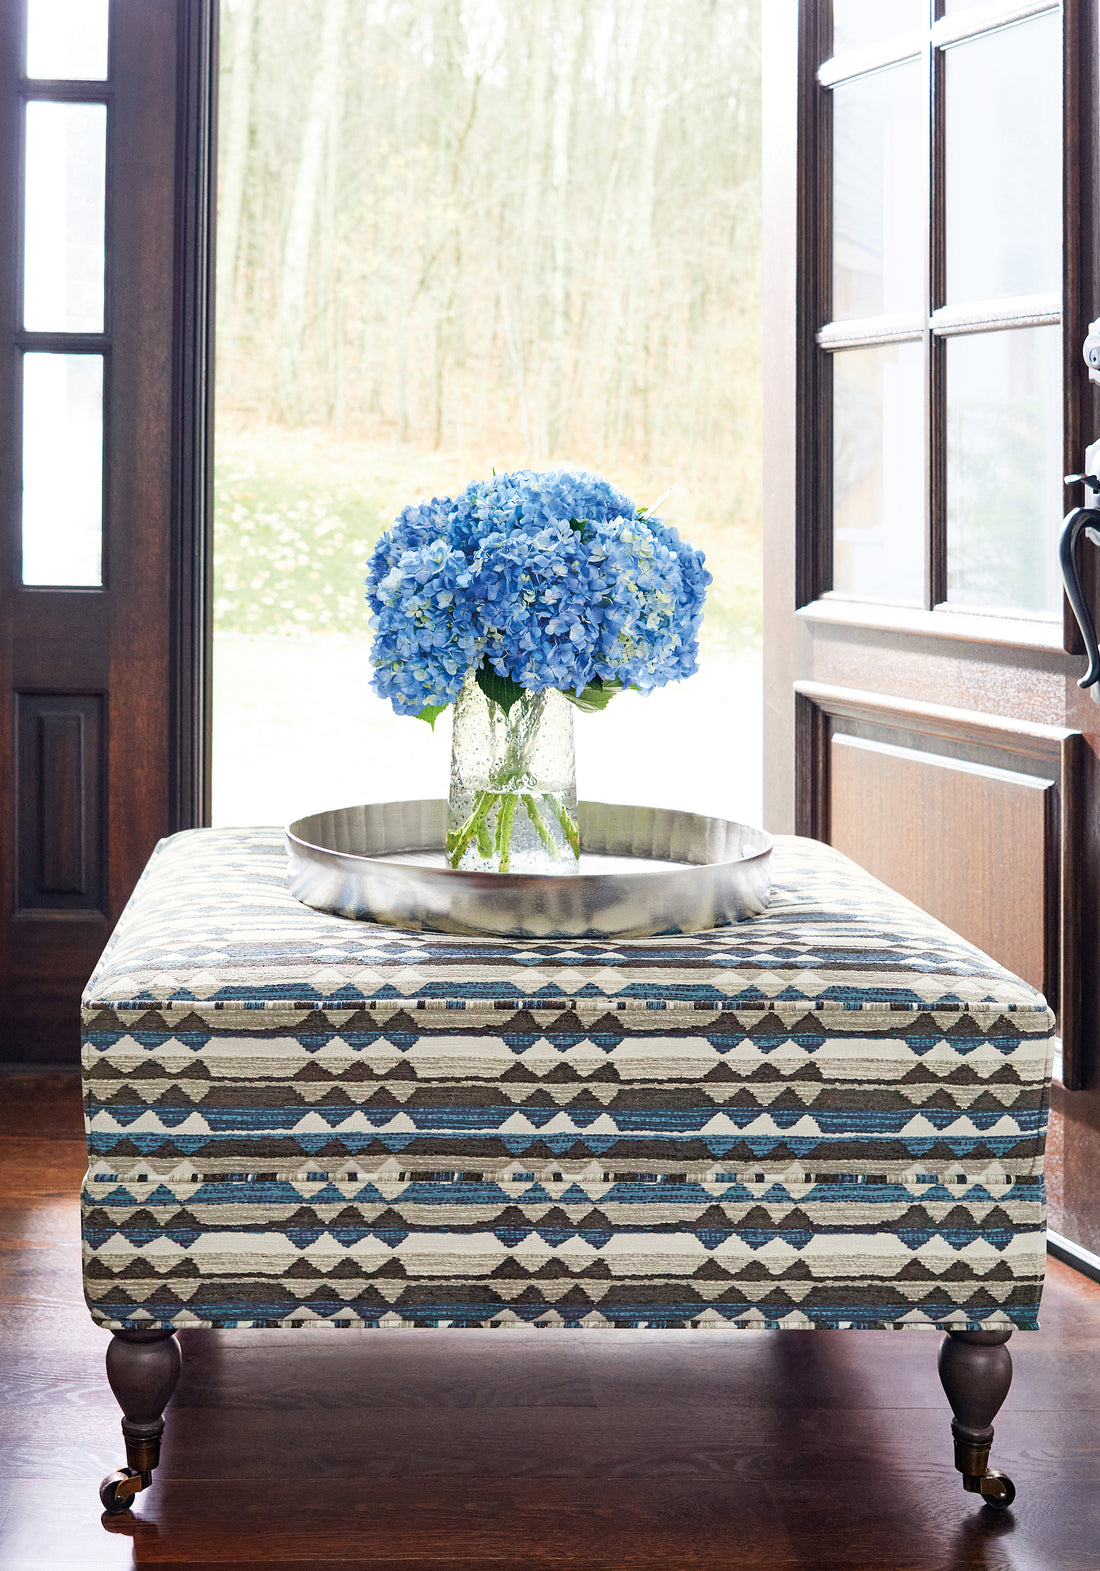 Stratford Ottoman in Saranac woven fabric in Midnight color - pattern number W78380 - by Thibaut fabric in the Sierra collection